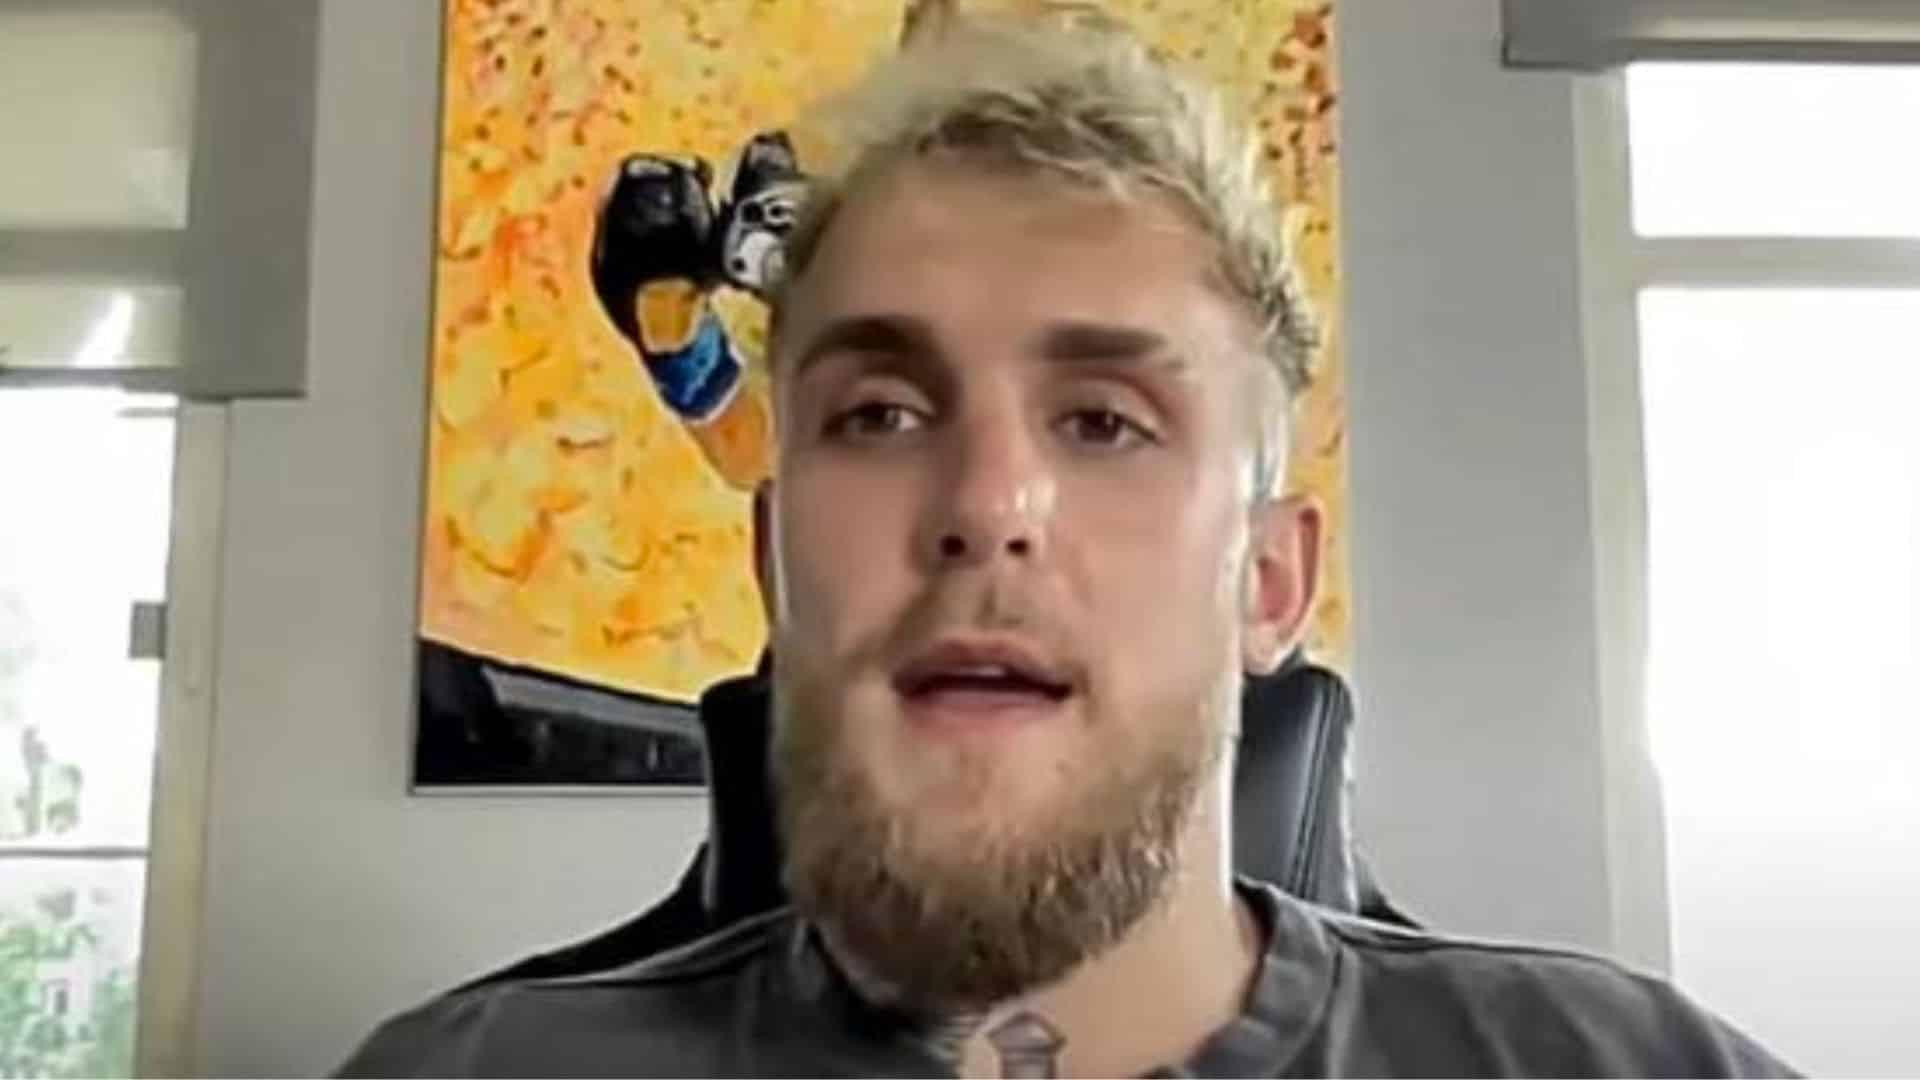 Jake Paul sitting talking to camera in front of yellow painting